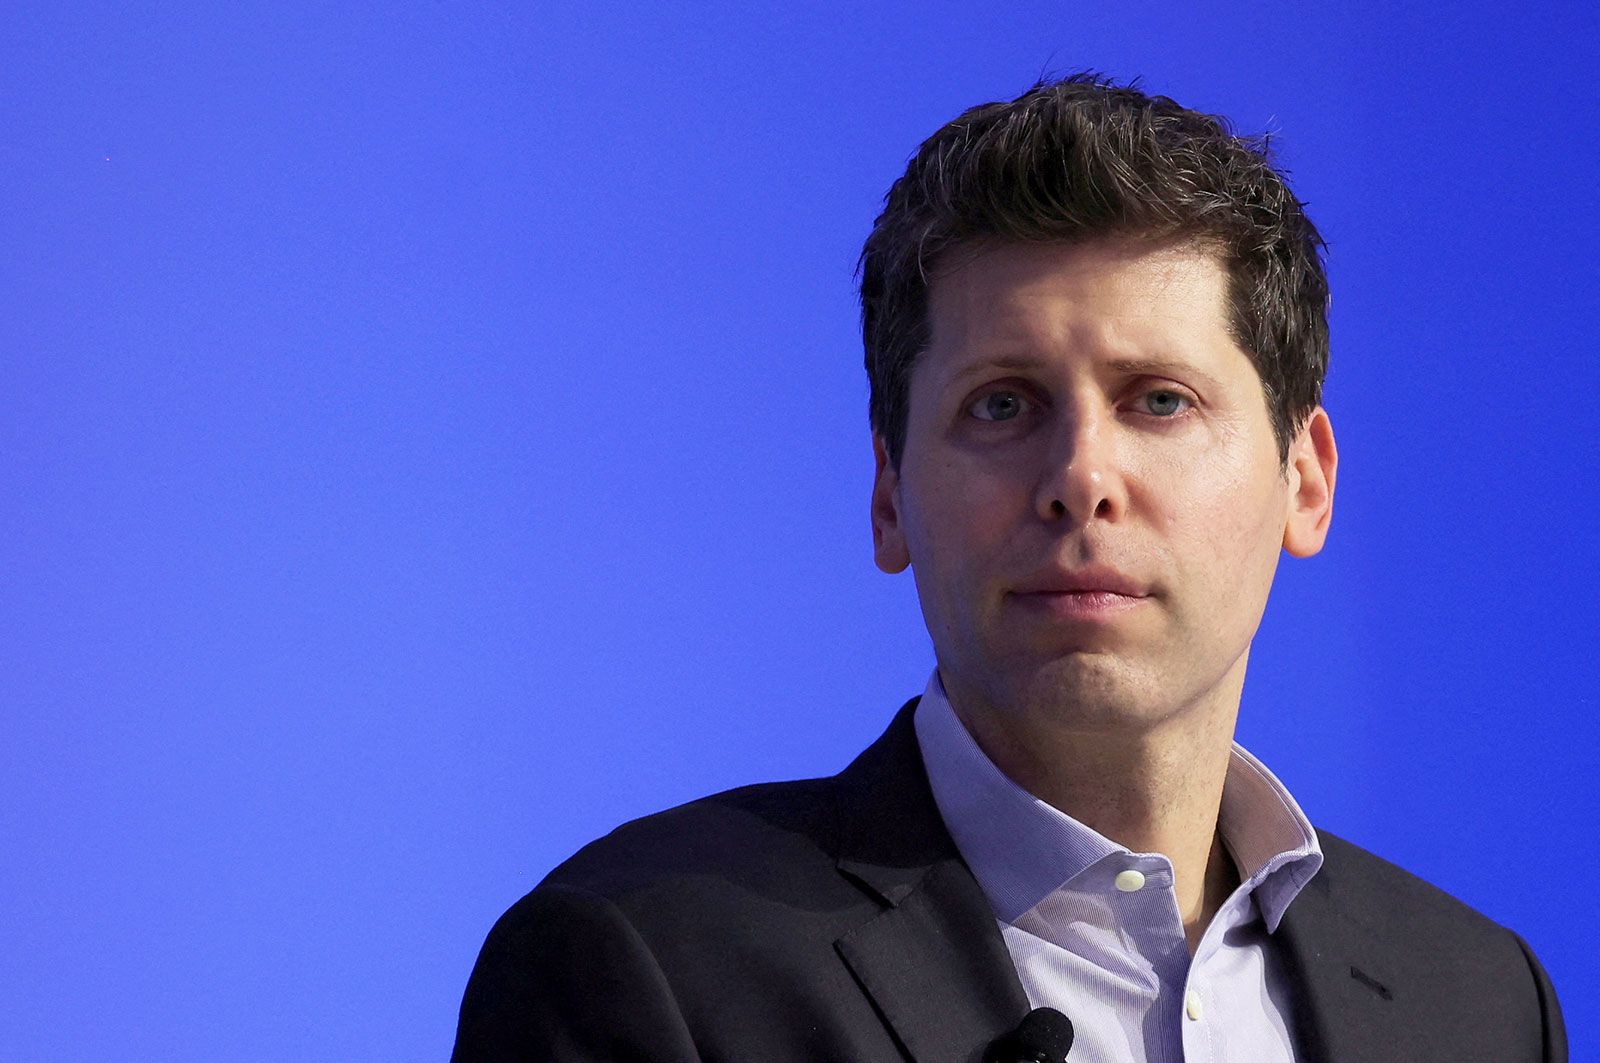 Sam Altman returns to OpenAI’s board of directors, fully reversing the ChatGPT company’s wild shakeup - Business and Finance - News